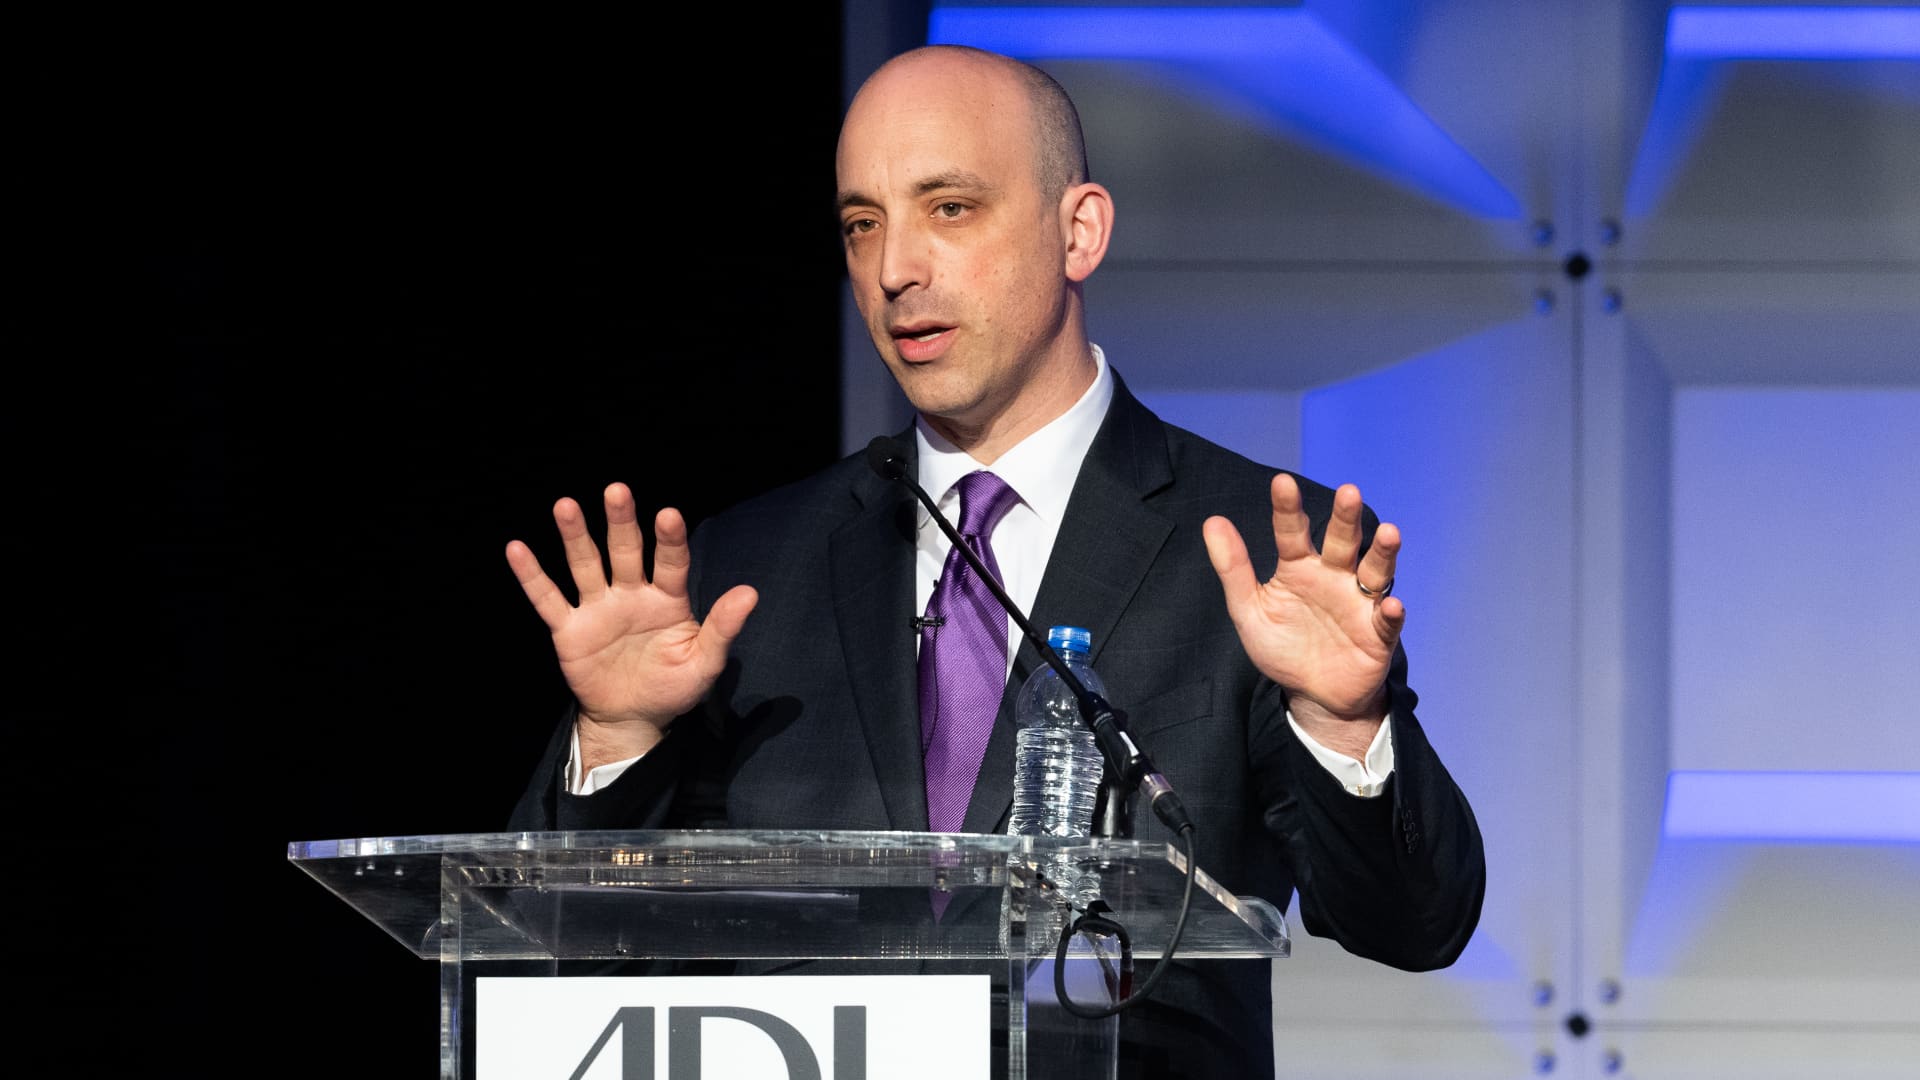 WASHINGTON, DC, UNITED STATES - 2018/05/06: Jonathan Greenblatt, ADL CEO and National Director, at the Anti-Defamation League (ADL) National Leadership Summit in Washington, DC. (Photo by Michael Brochstein/SOPA Images/LightRocket via Getty Images)